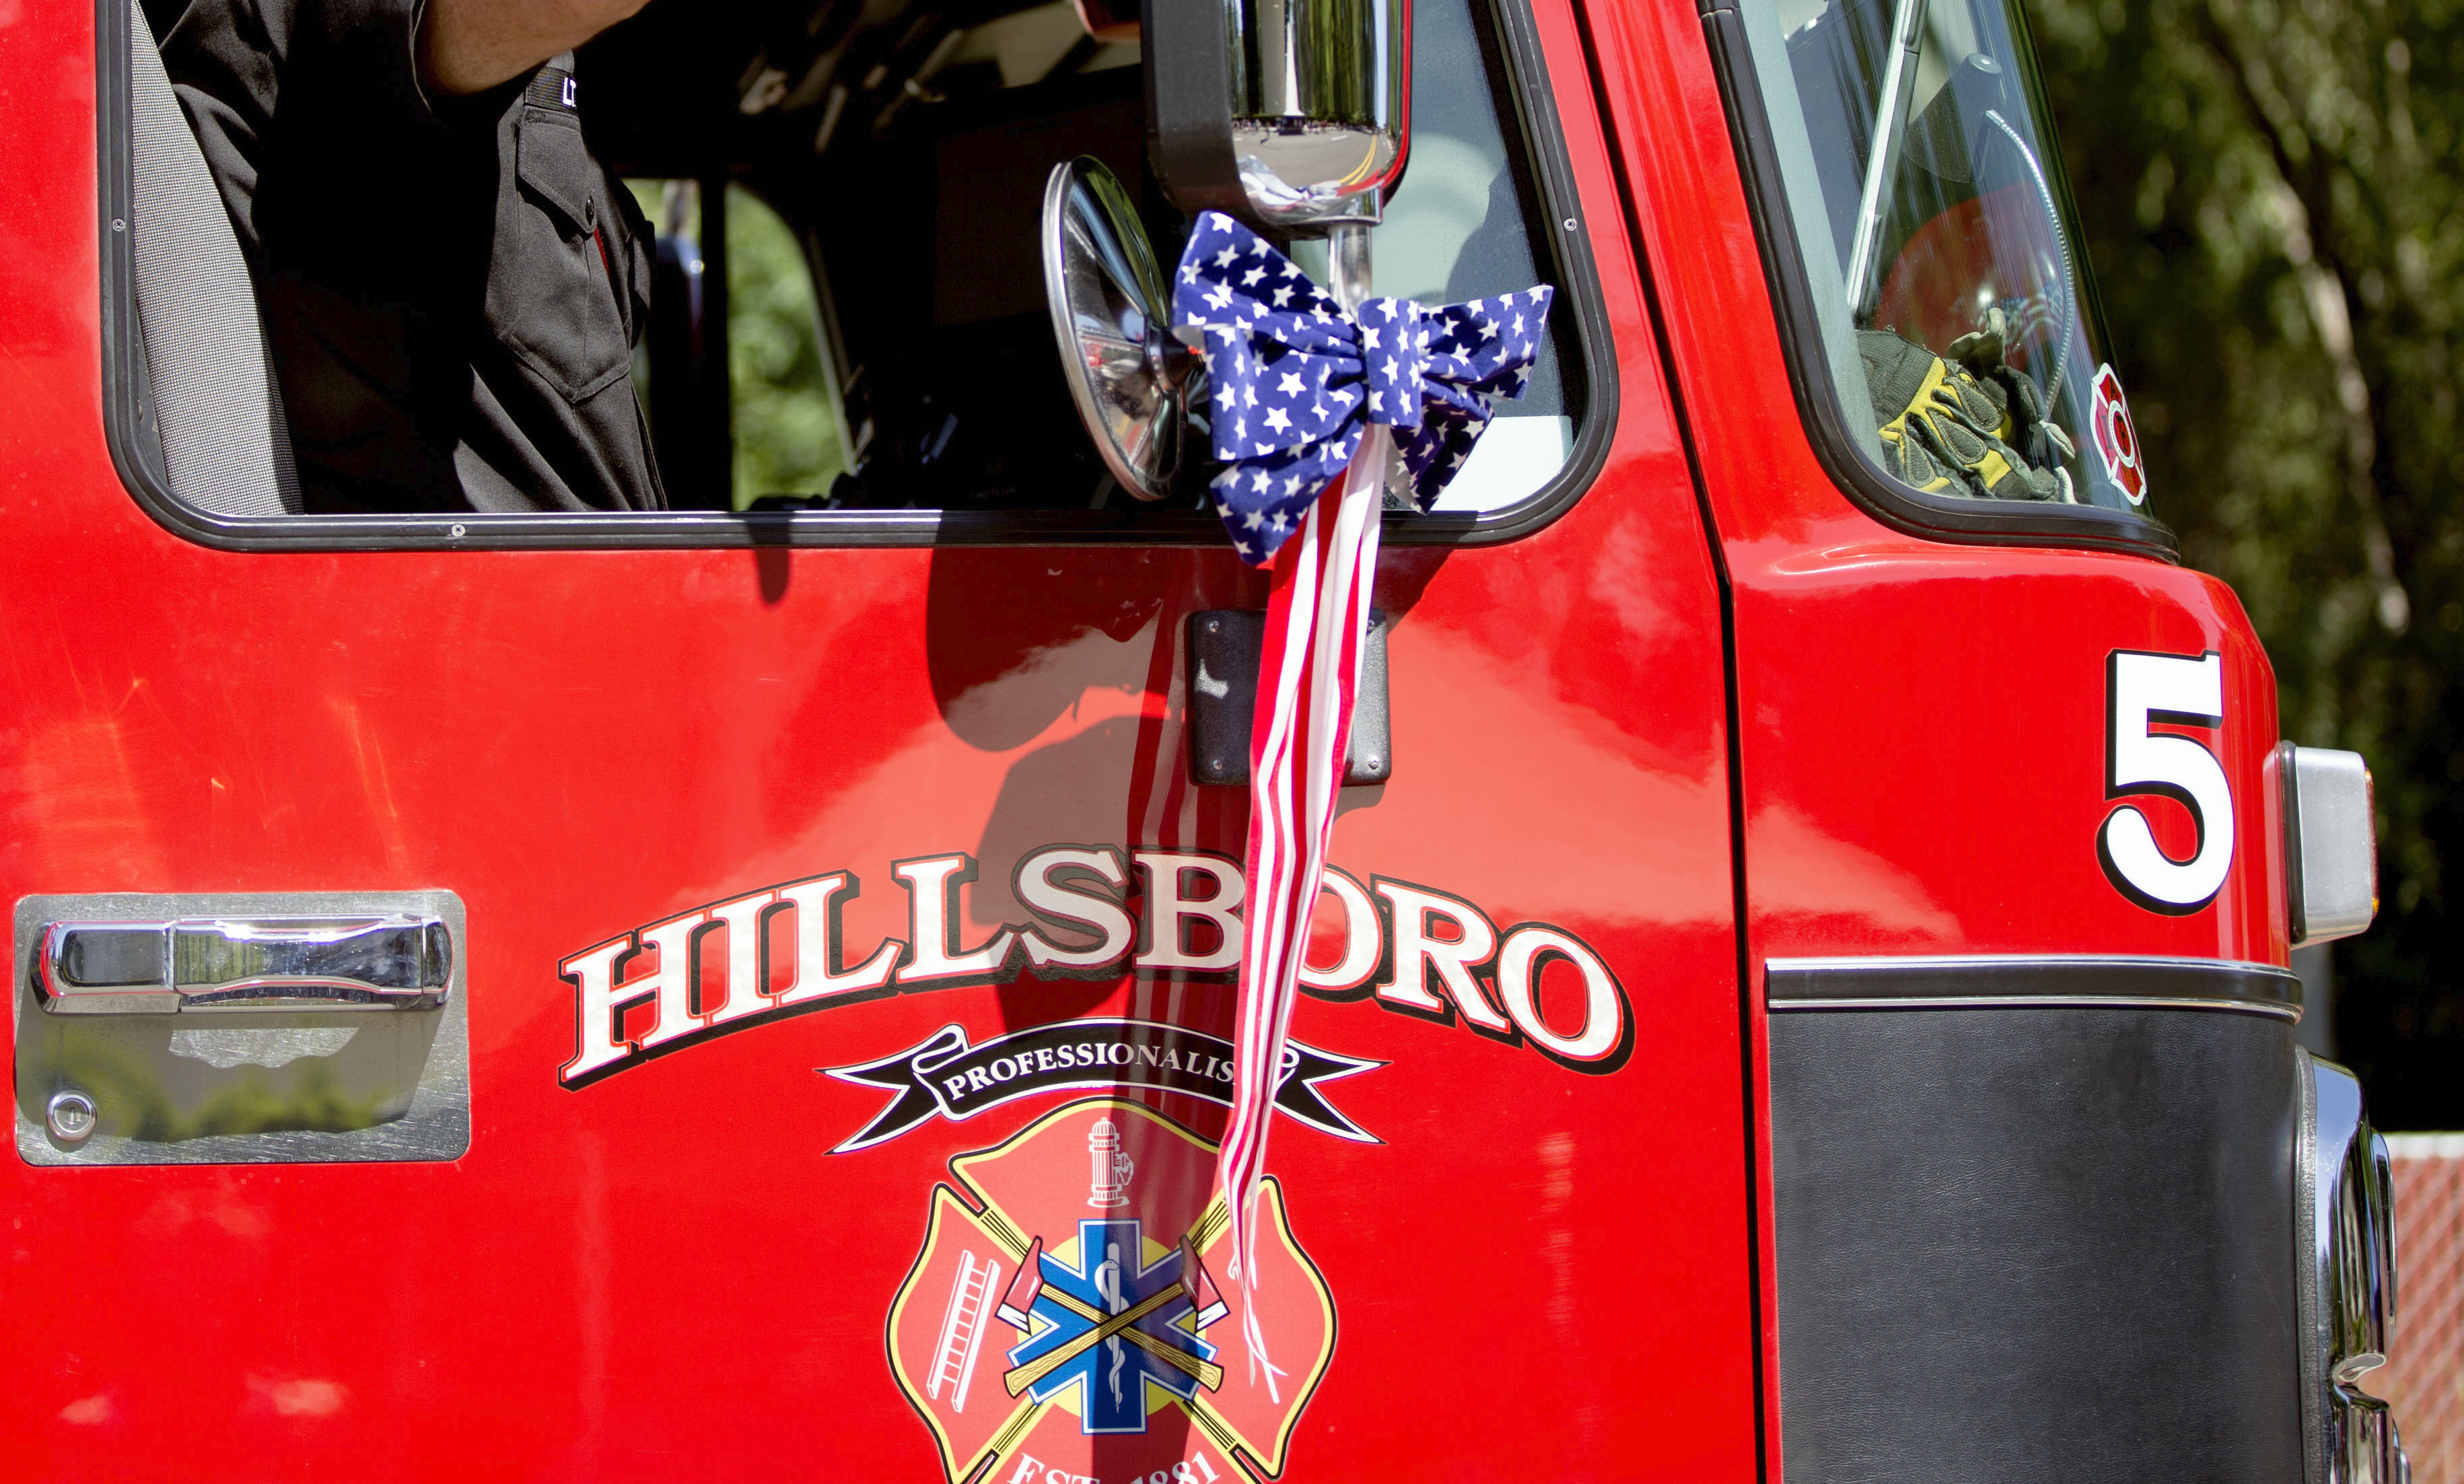 3 firefighters sue Hillsboro Fire and Rescue, alleging sex and age discrimination, toxic environment